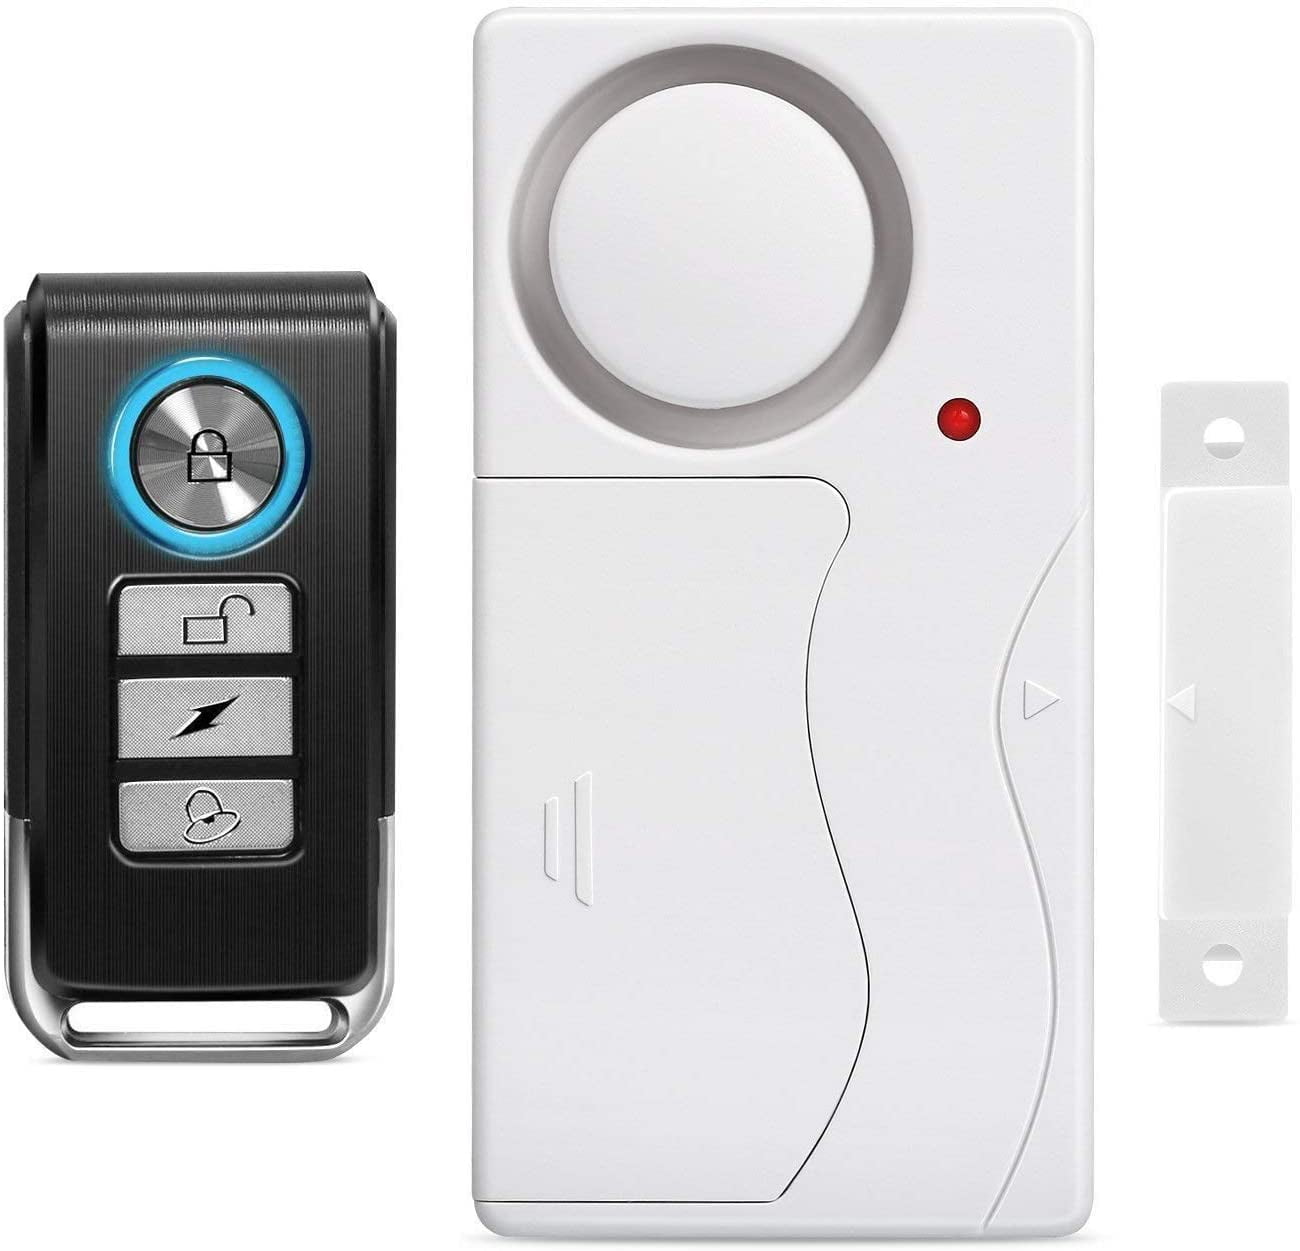 Wsdcam Wireless Vibration Alarm with Remote Control Anti-Theft Alarm Security 